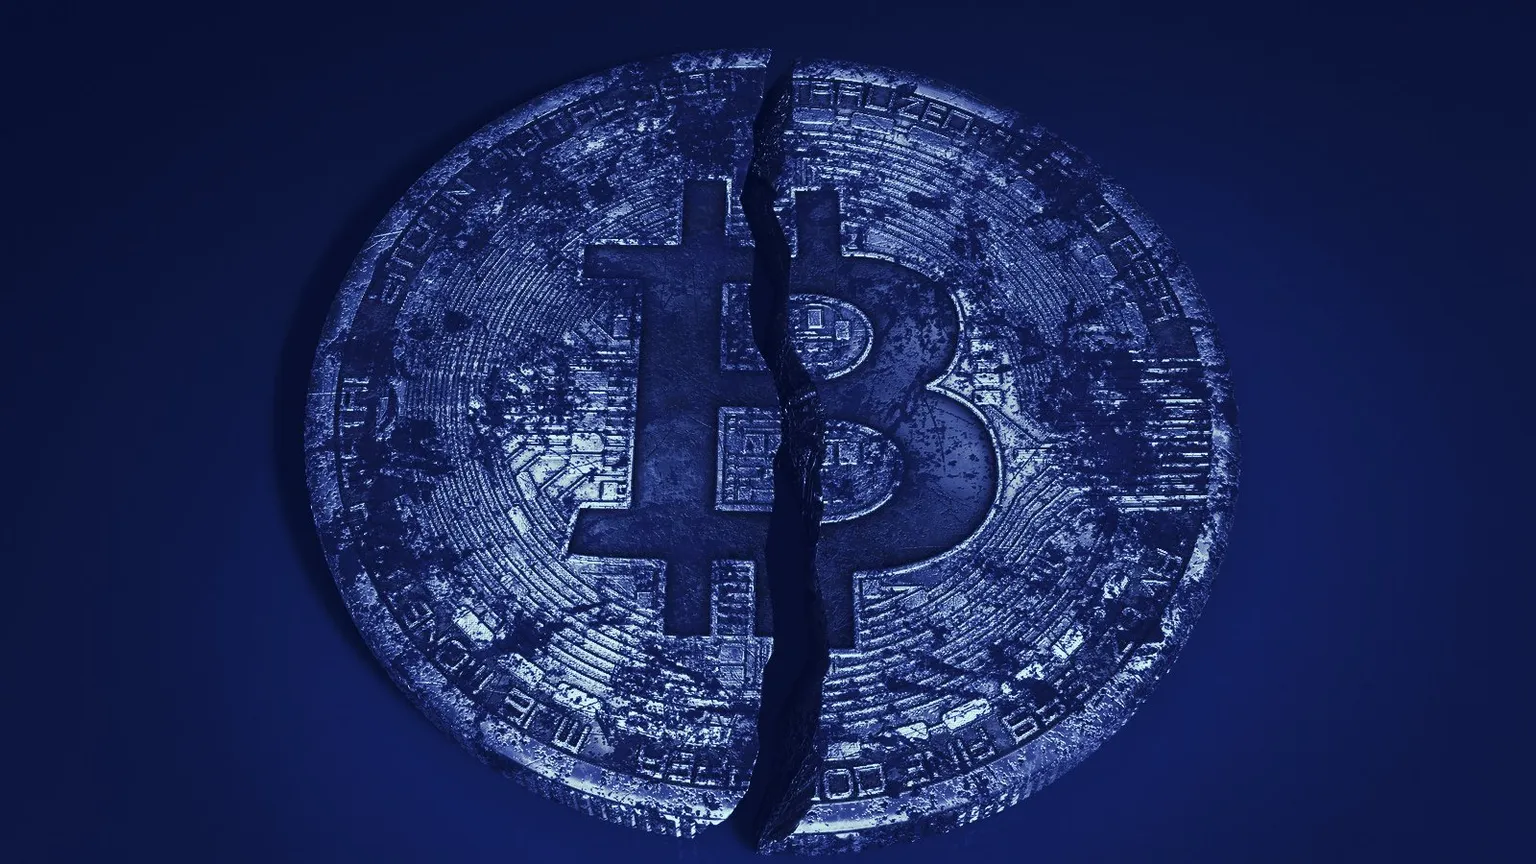 Bitcoin failed to take advantage of the “perfect storm” created by the coronavirus crisis. Image: Shutterstock